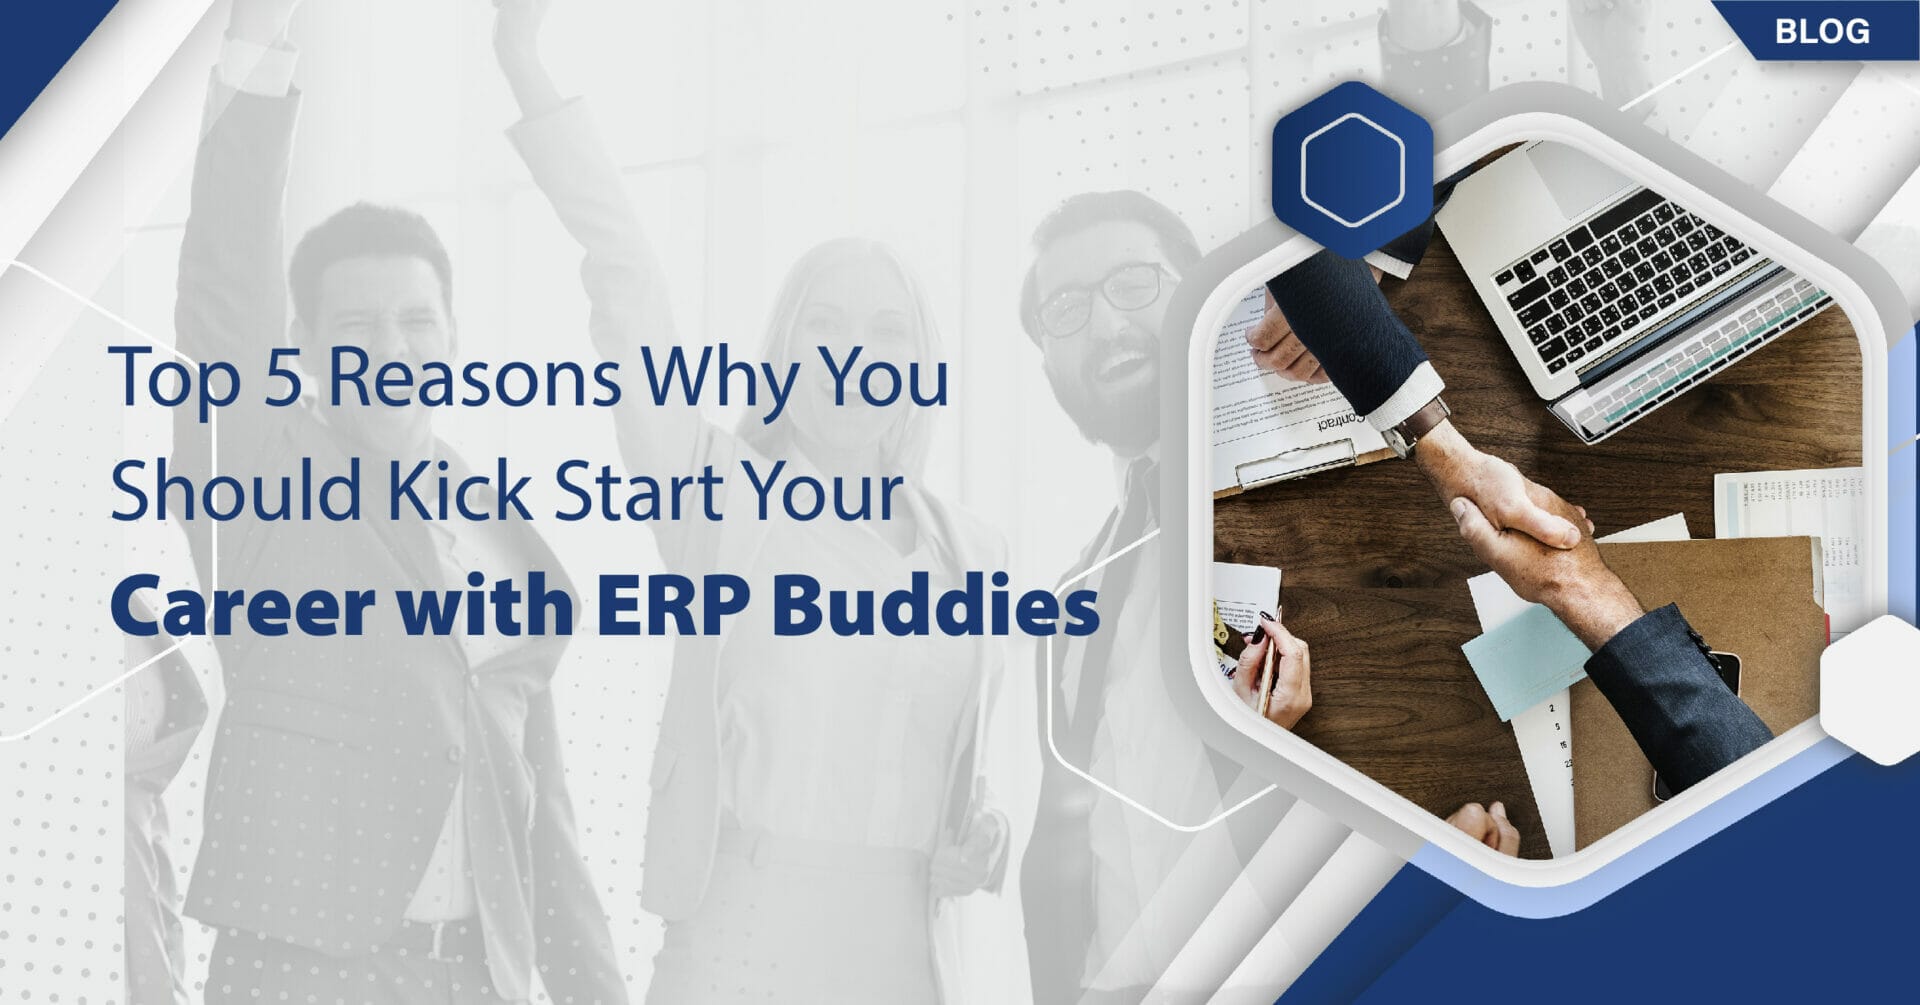 Top 5 Reasons Why You Should Kick Start Your Career with ERP Buddies